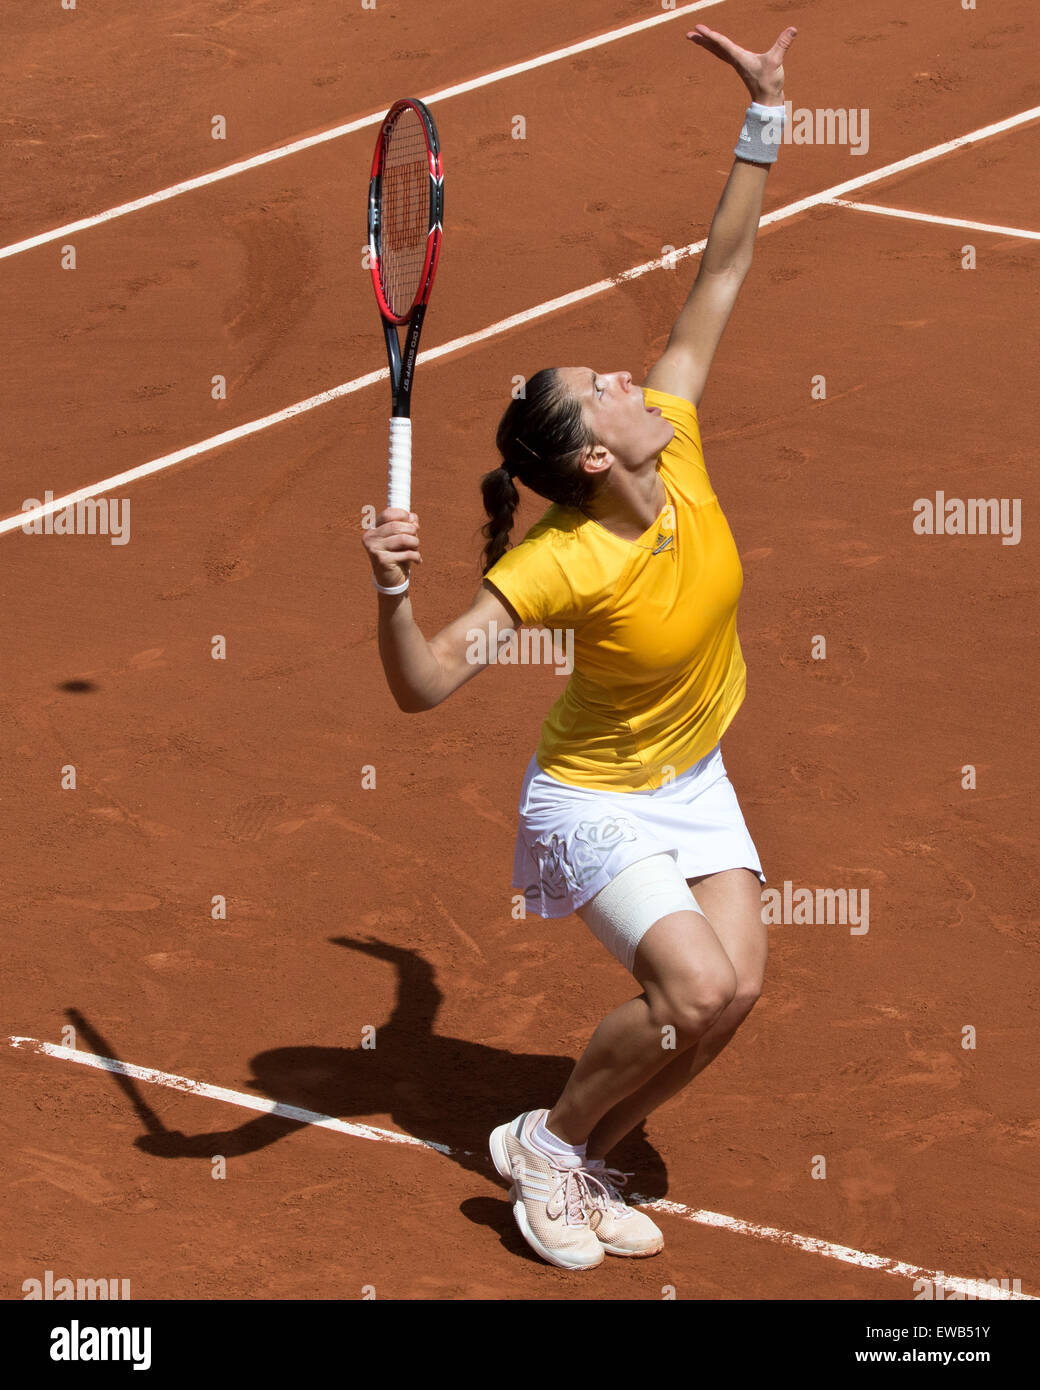 Andrea Petkovic (GER) in action at the French Open 2015 Stock Photo